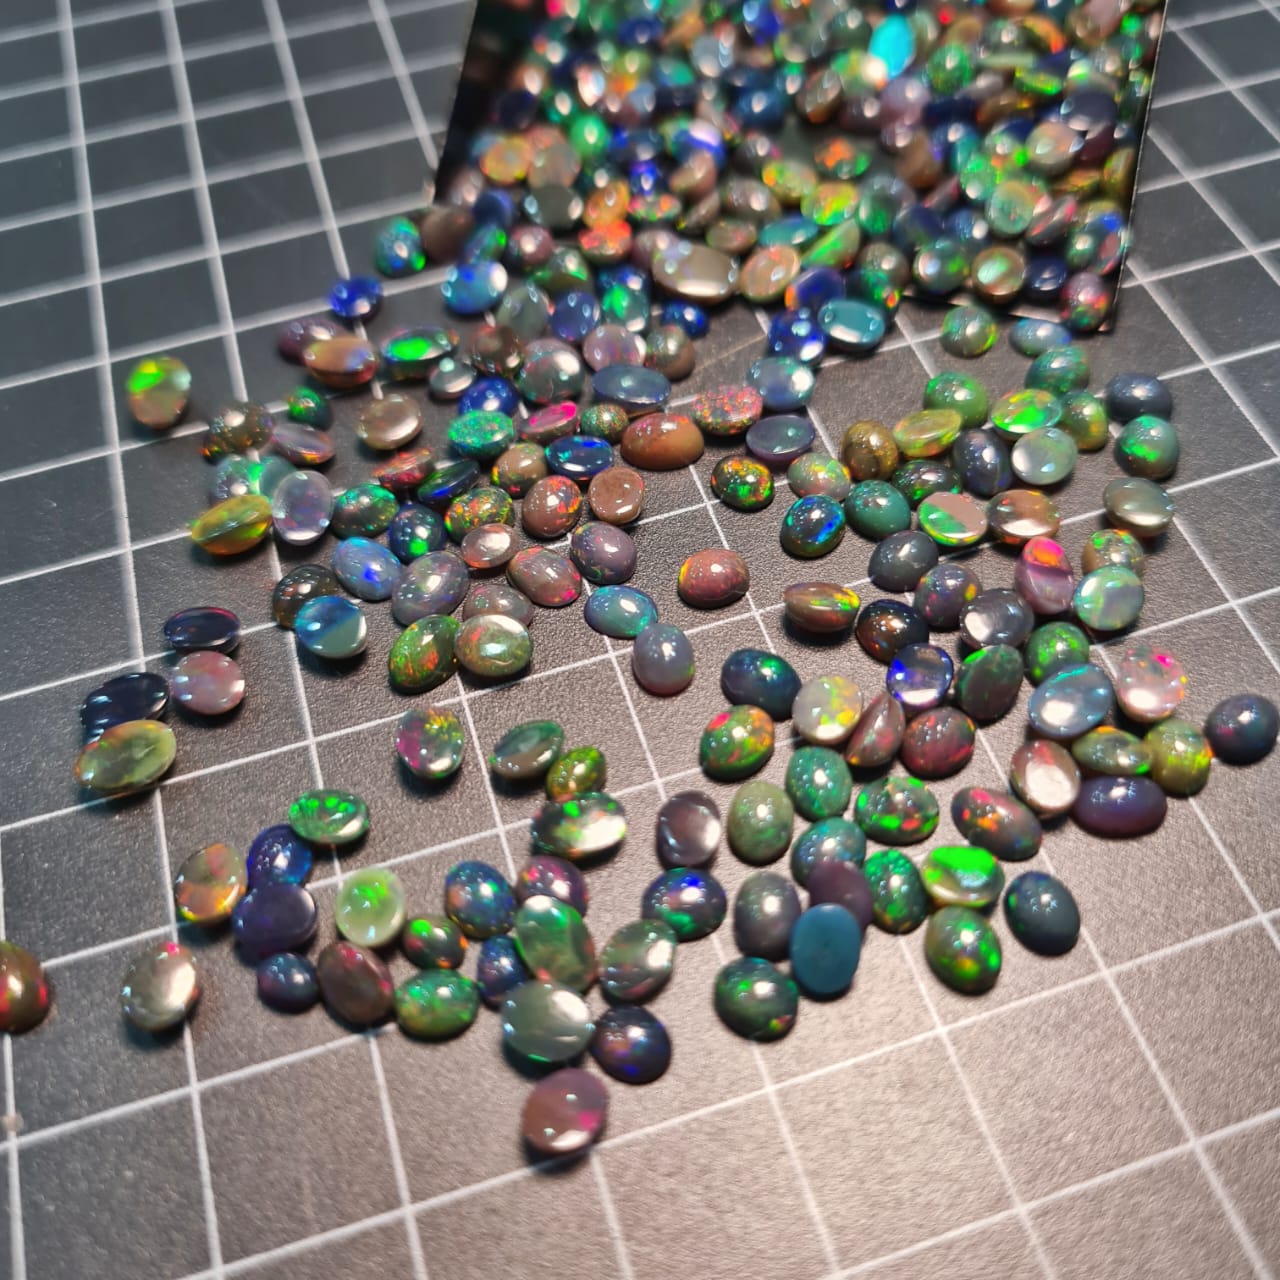 10 Carats of Black Opal Cabochons | 5-6mm Ovals | Welo Mined - The LabradoriteKing